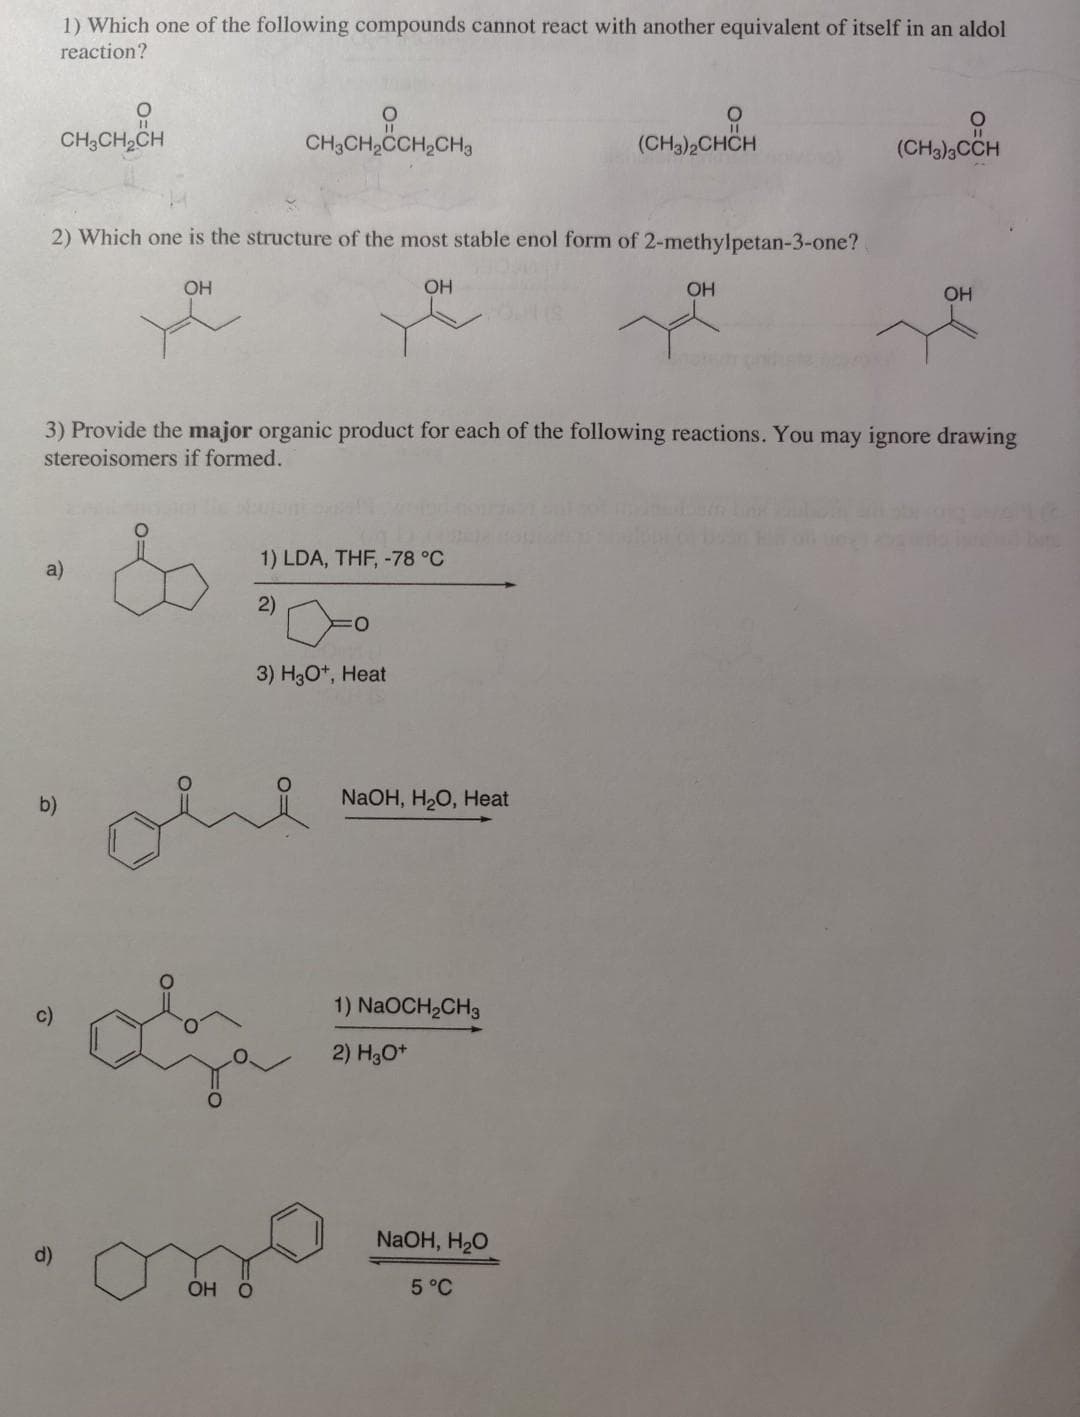 1) Which one of the following compounds cannot react with another equivalent of itself in an aldol
reaction?
CH3CH2CH
CH3CH2CCH,CH3
(CH3)2CHCH
(CH3)3CCH
2) Which one is the structure of the most stable enol form of 2-methylpetan-3-one?
OH
OH
OH
OH
3) Provide the major organic product for each of the following reactions. You may ignore drawing
stereoisomers if formed.
1) LDA, THF, -78 °C
a)
2)
3) H3O*, Heat
ohe
b)
NaOH, HO, Нeat
1) NaOCH2CH3
2) H3O*
NaOH, H20
ОН О
5°C
